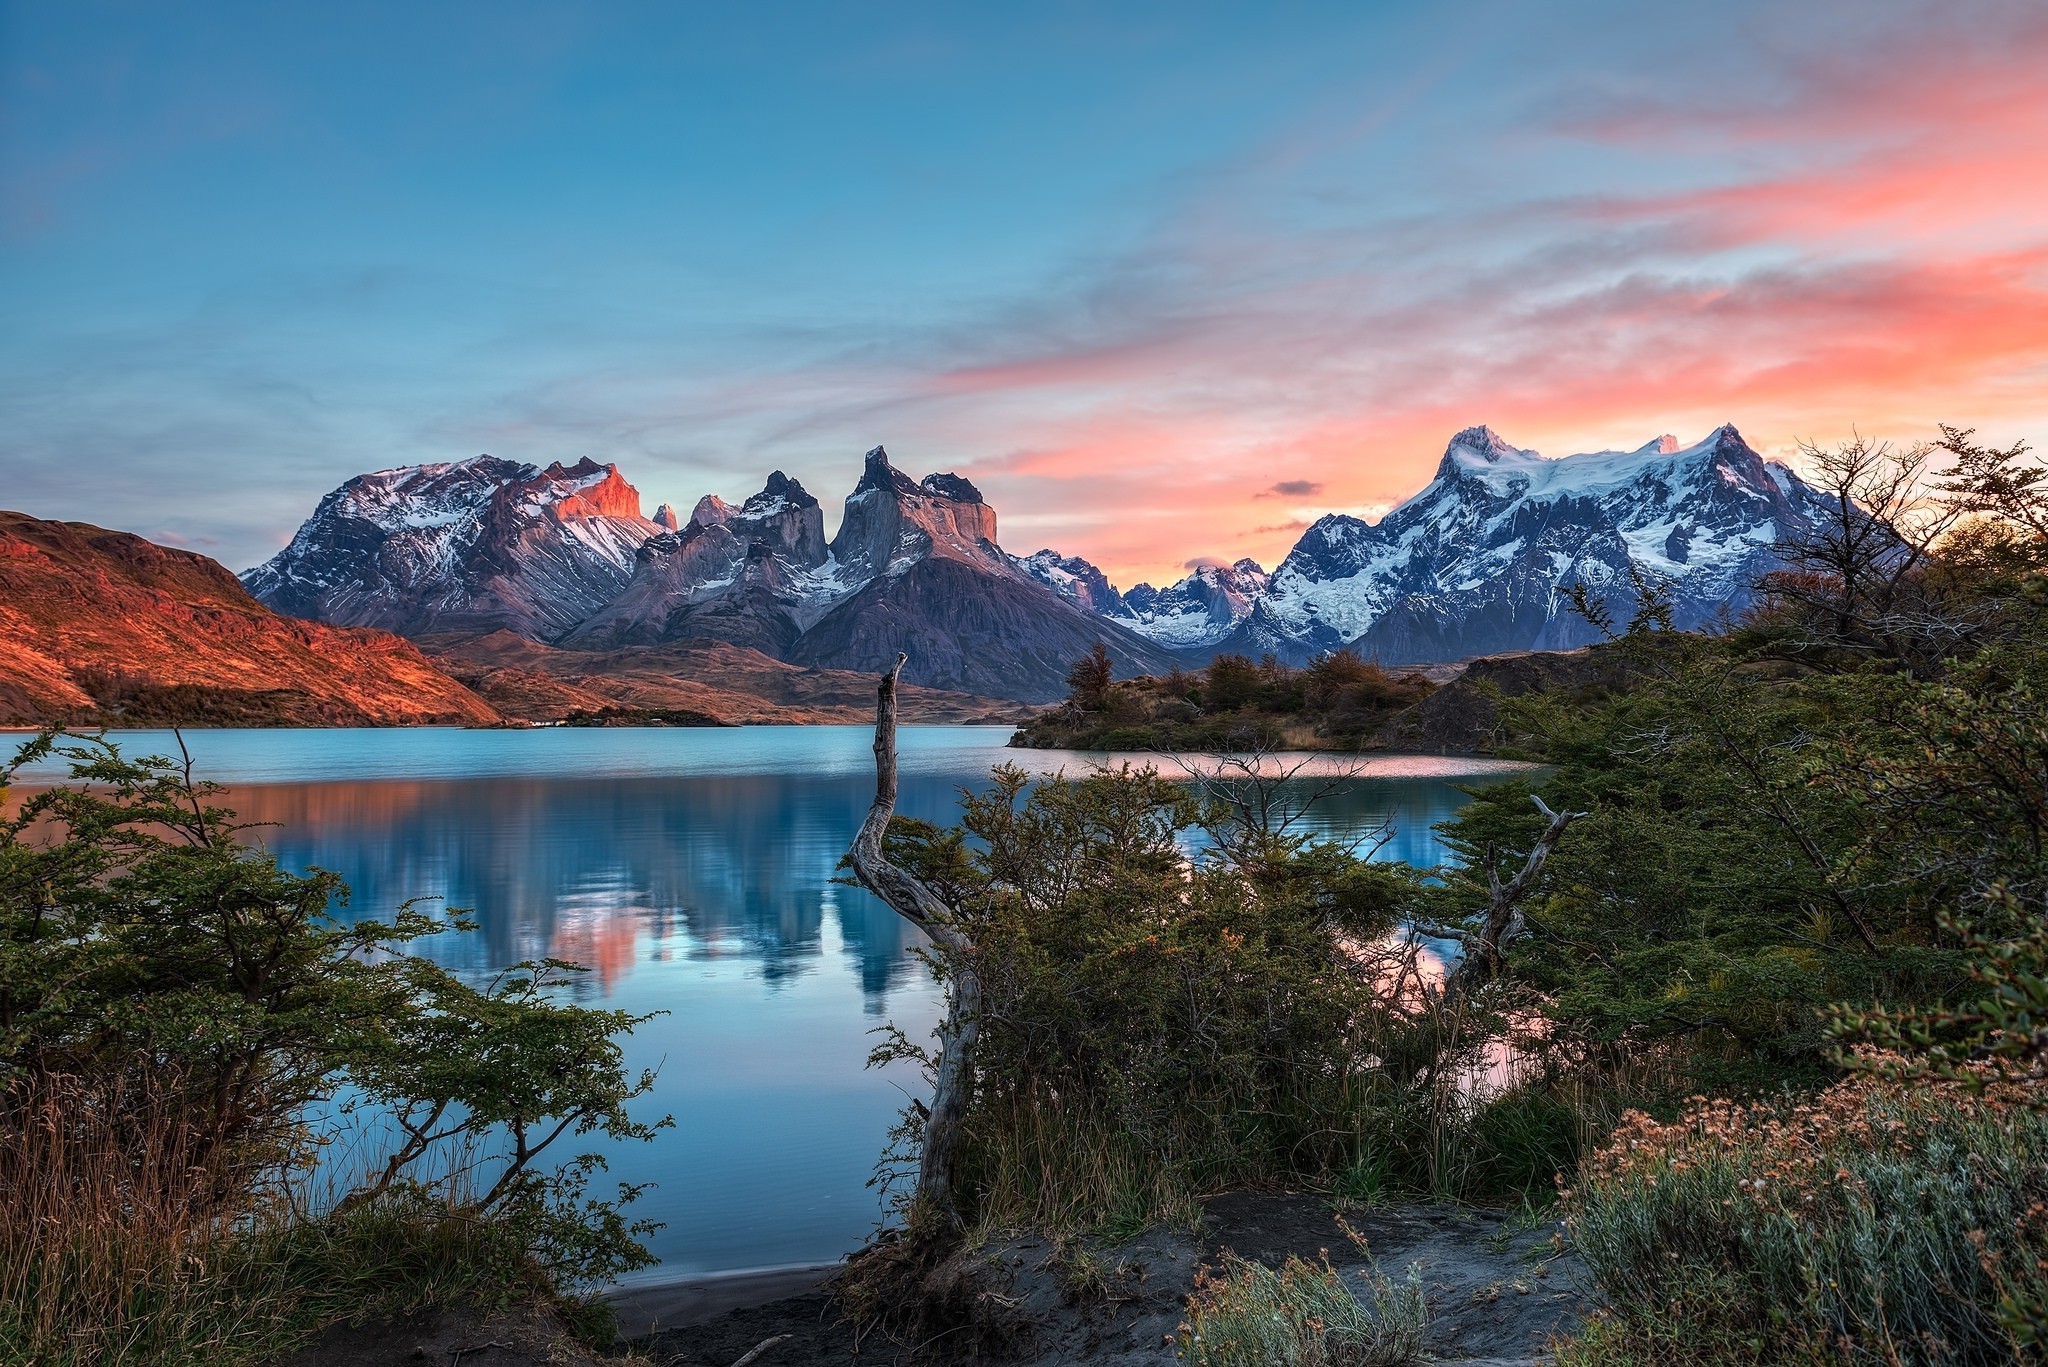 photography, Nature, Landscape, Mountains, Lake, Sunset, Shrubs, Snowy Peak, Torres Del Paine, National Park, Patagonia, Chile Wallpaper